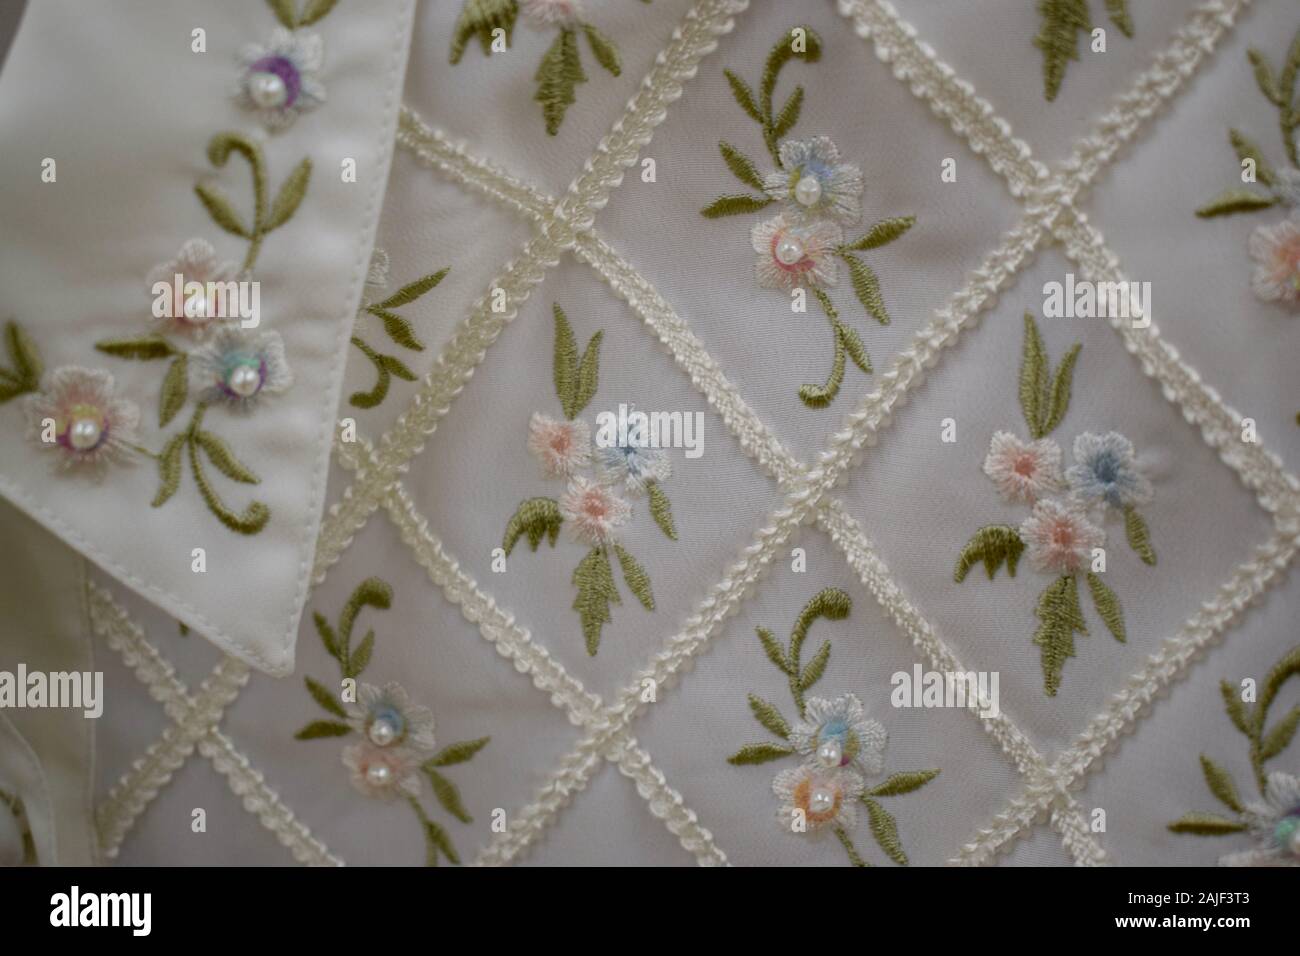 Delicate embroidery and beading create a floral pattern. Stock Photo